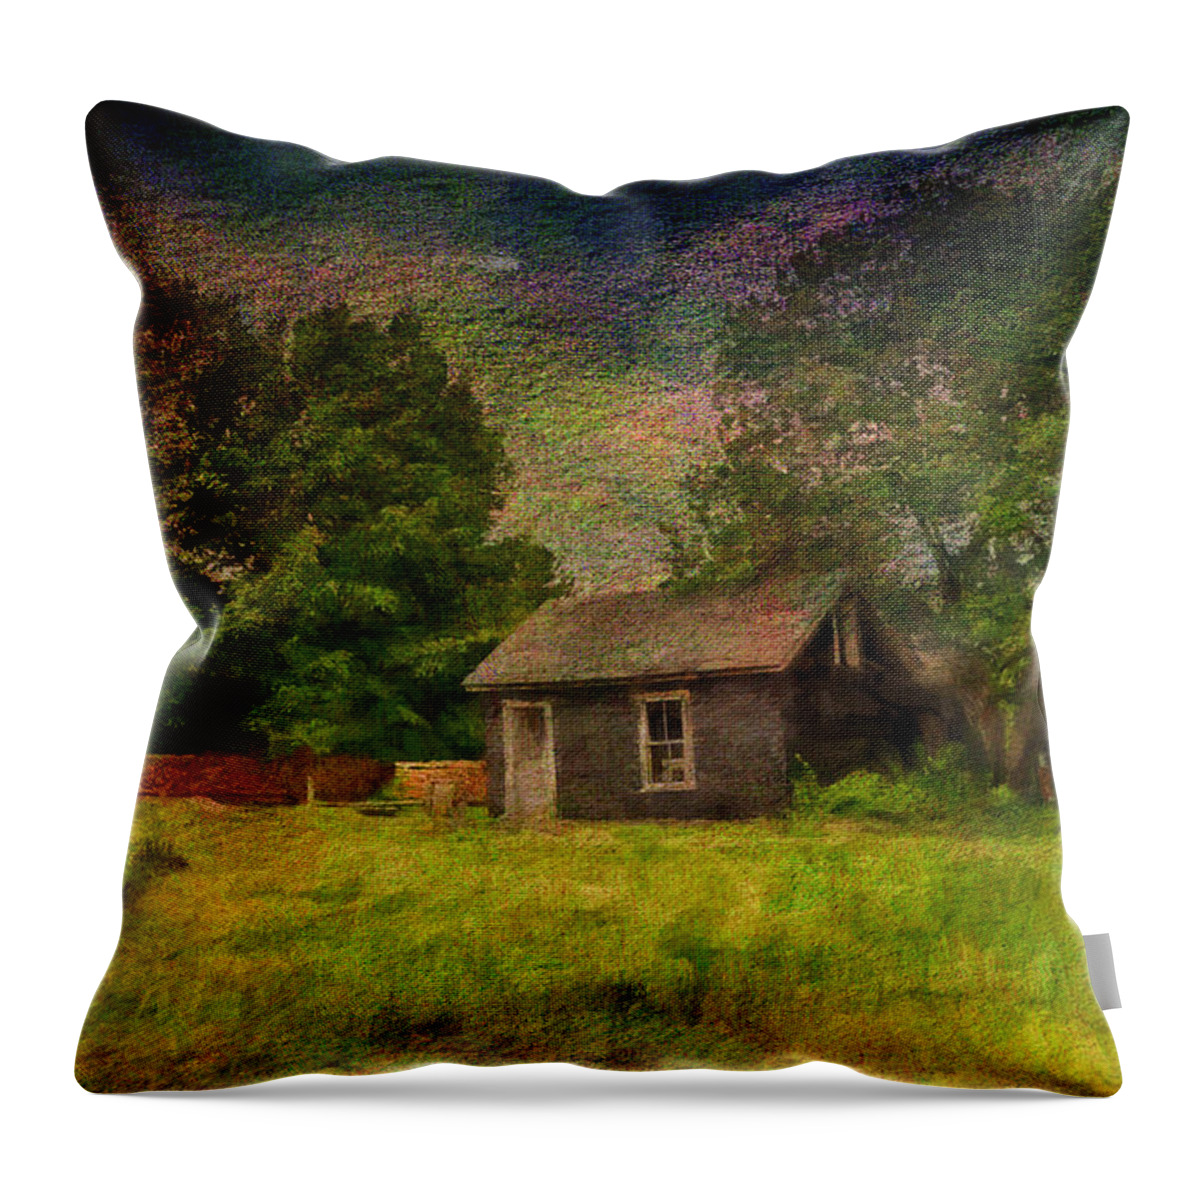 Nature Throw Pillow featuring the photograph A Day At The Farm by Tricia Marchlik